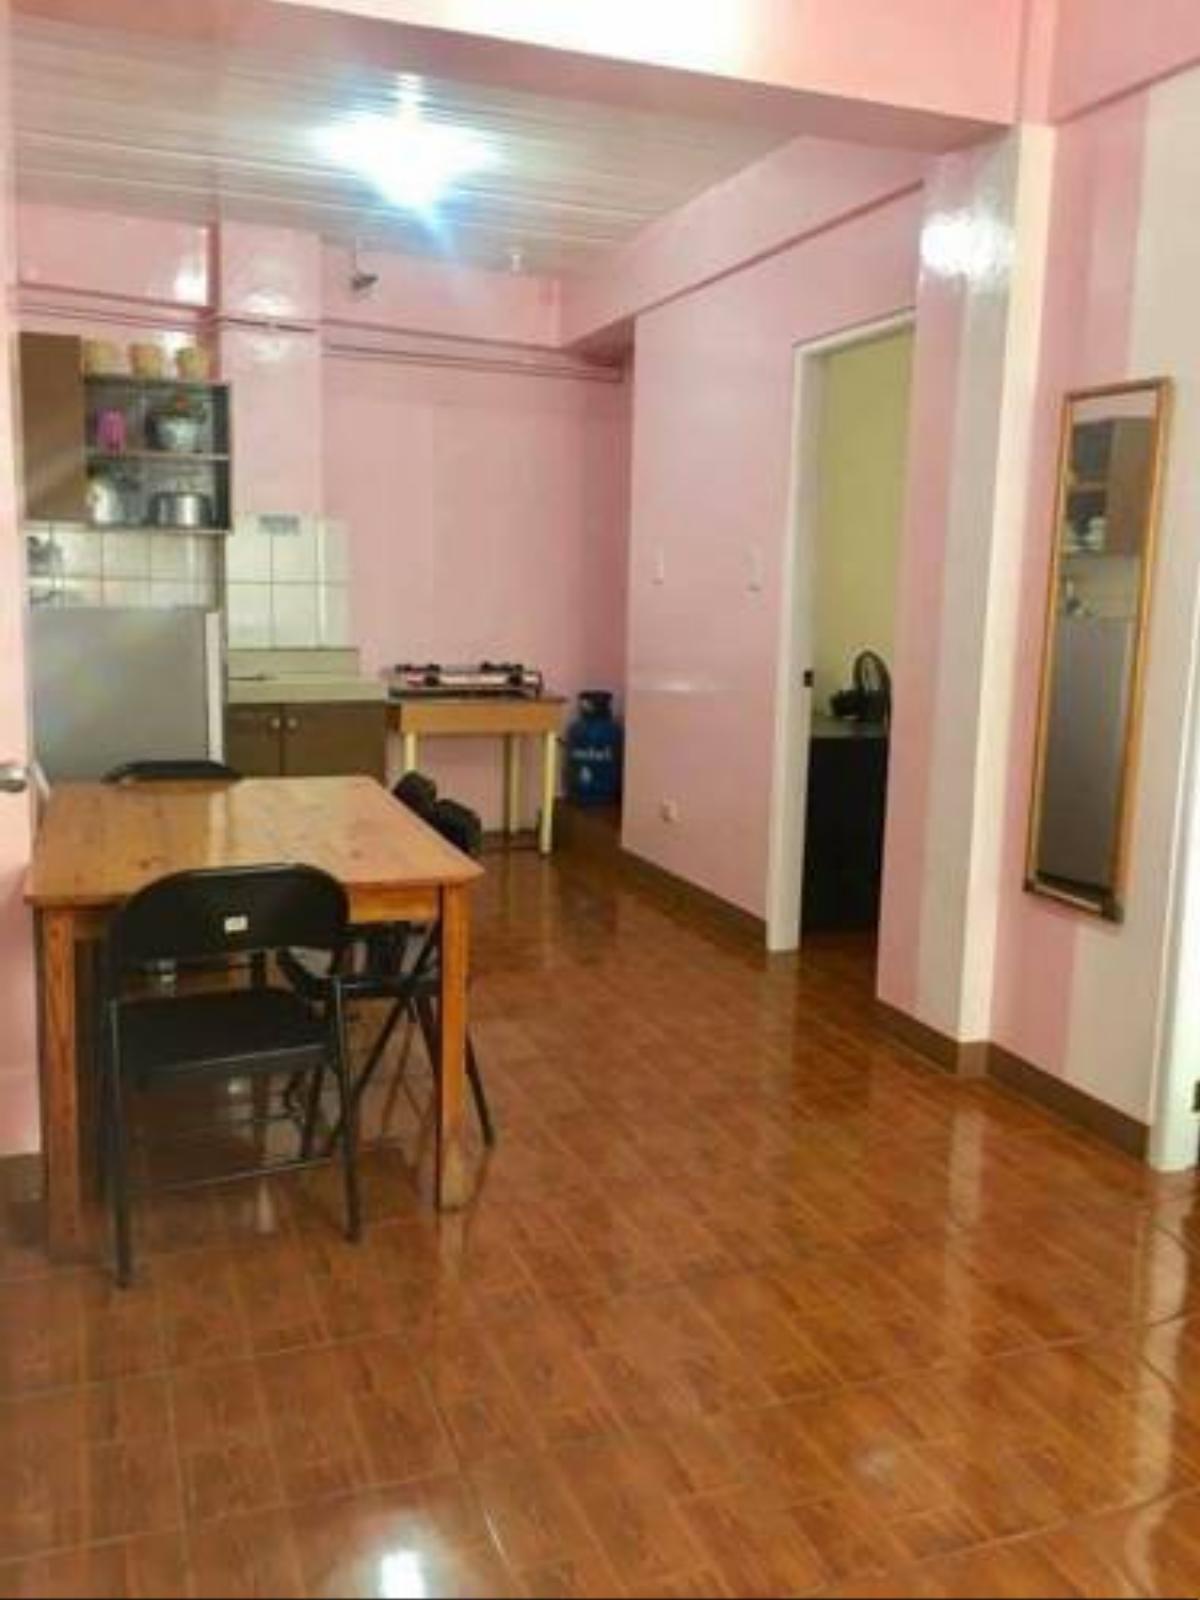 MD'S 2 Bedroom House Hotel Baguio Philippines